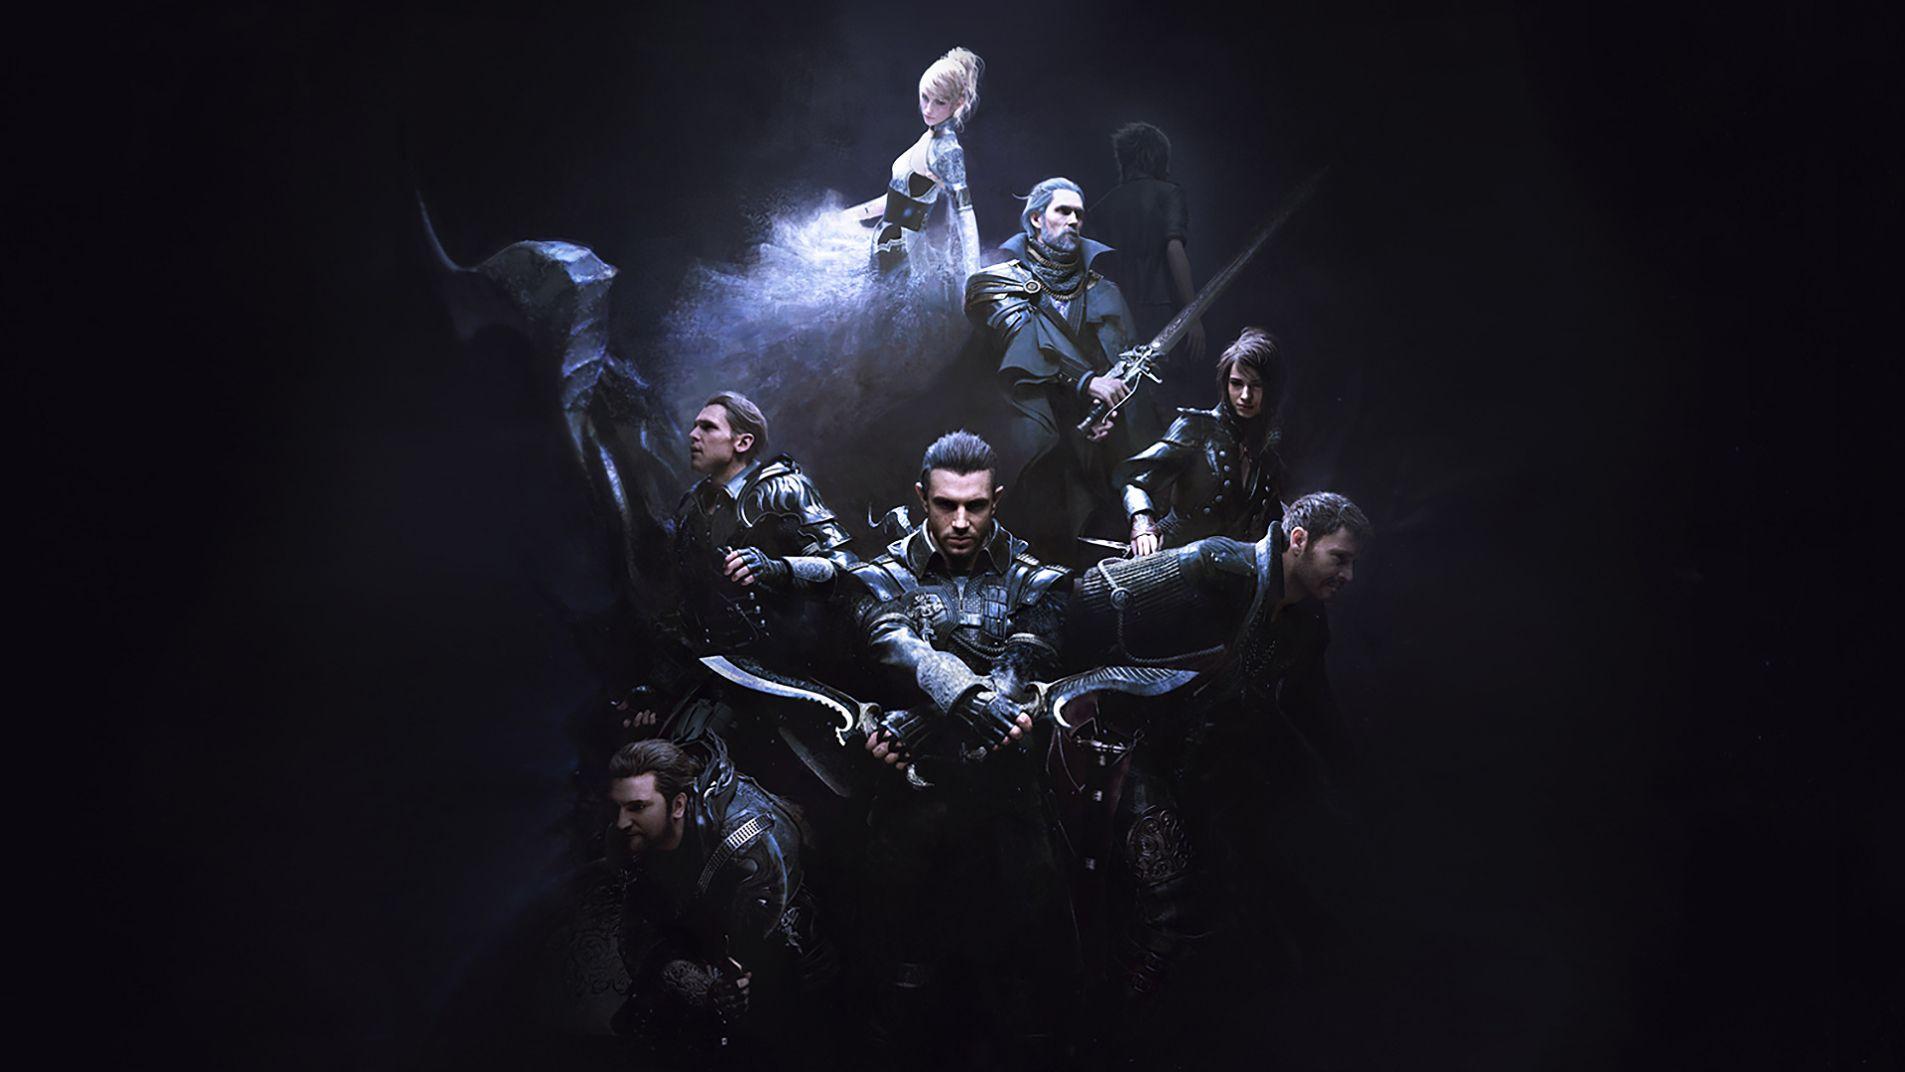 Get A Fancy Kingsglaive: Final Fantasy XV Wallpapers + Movie Synopsis